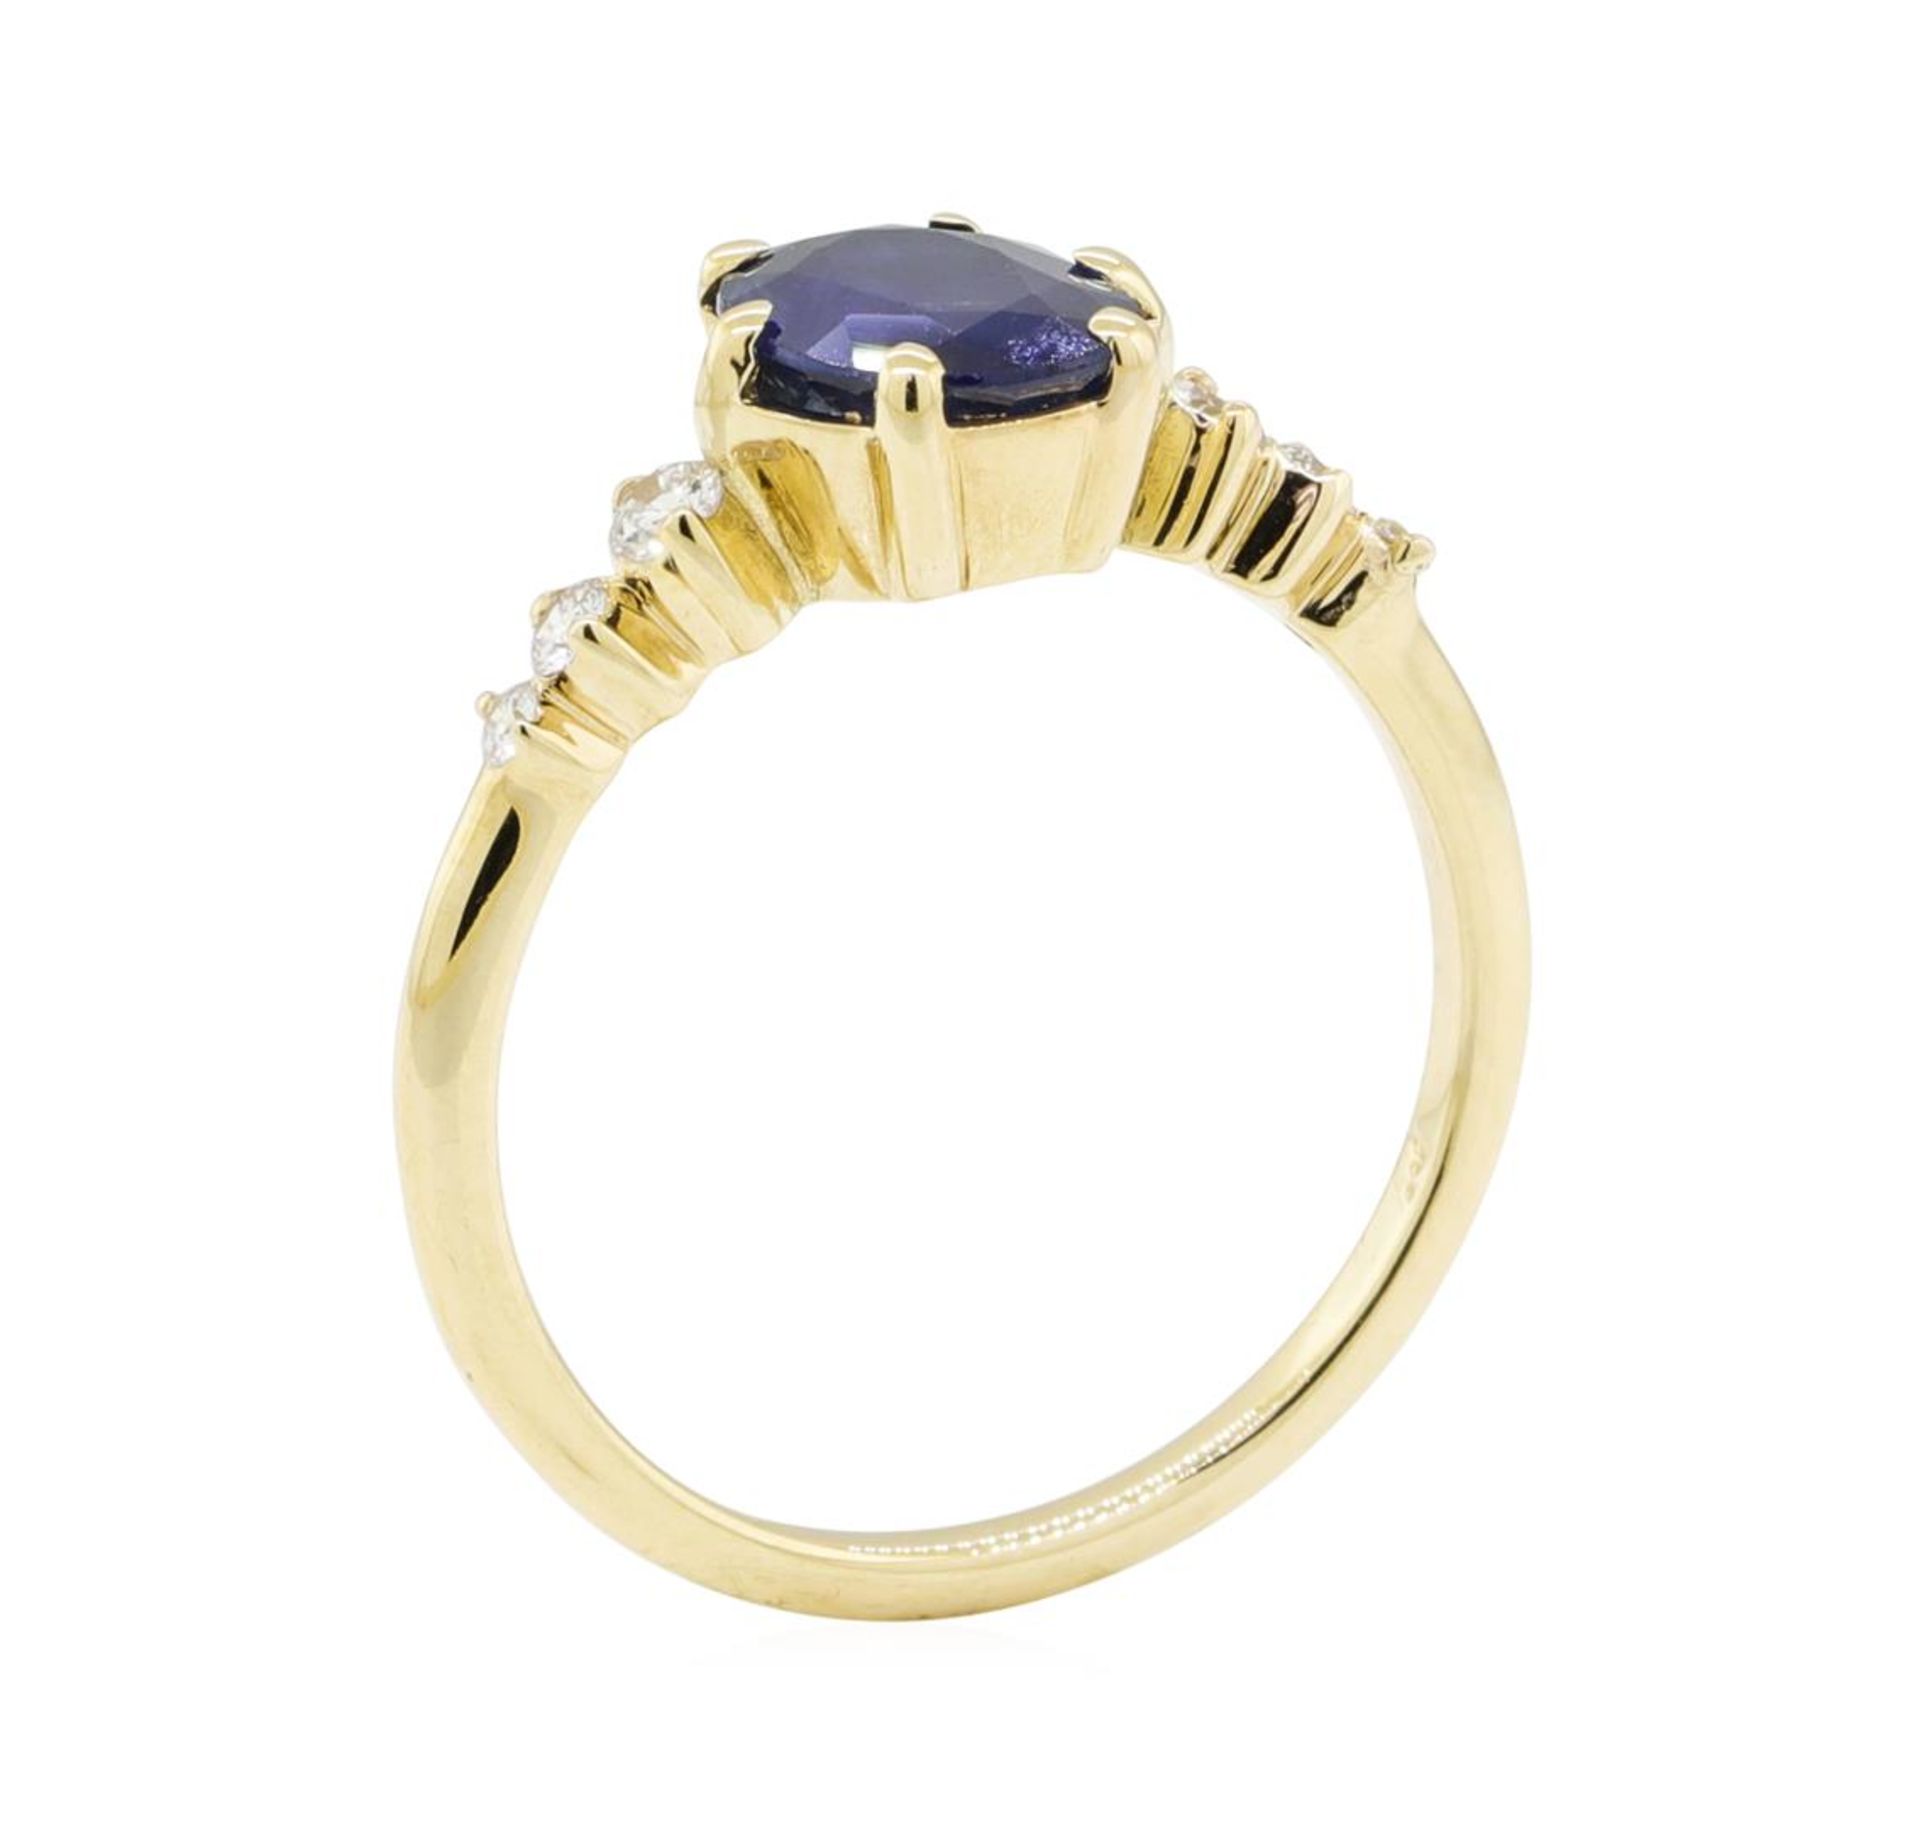 1.43ctw Sapphire and Diamond Ring - 14KT Yellow Gold - Image 4 of 4